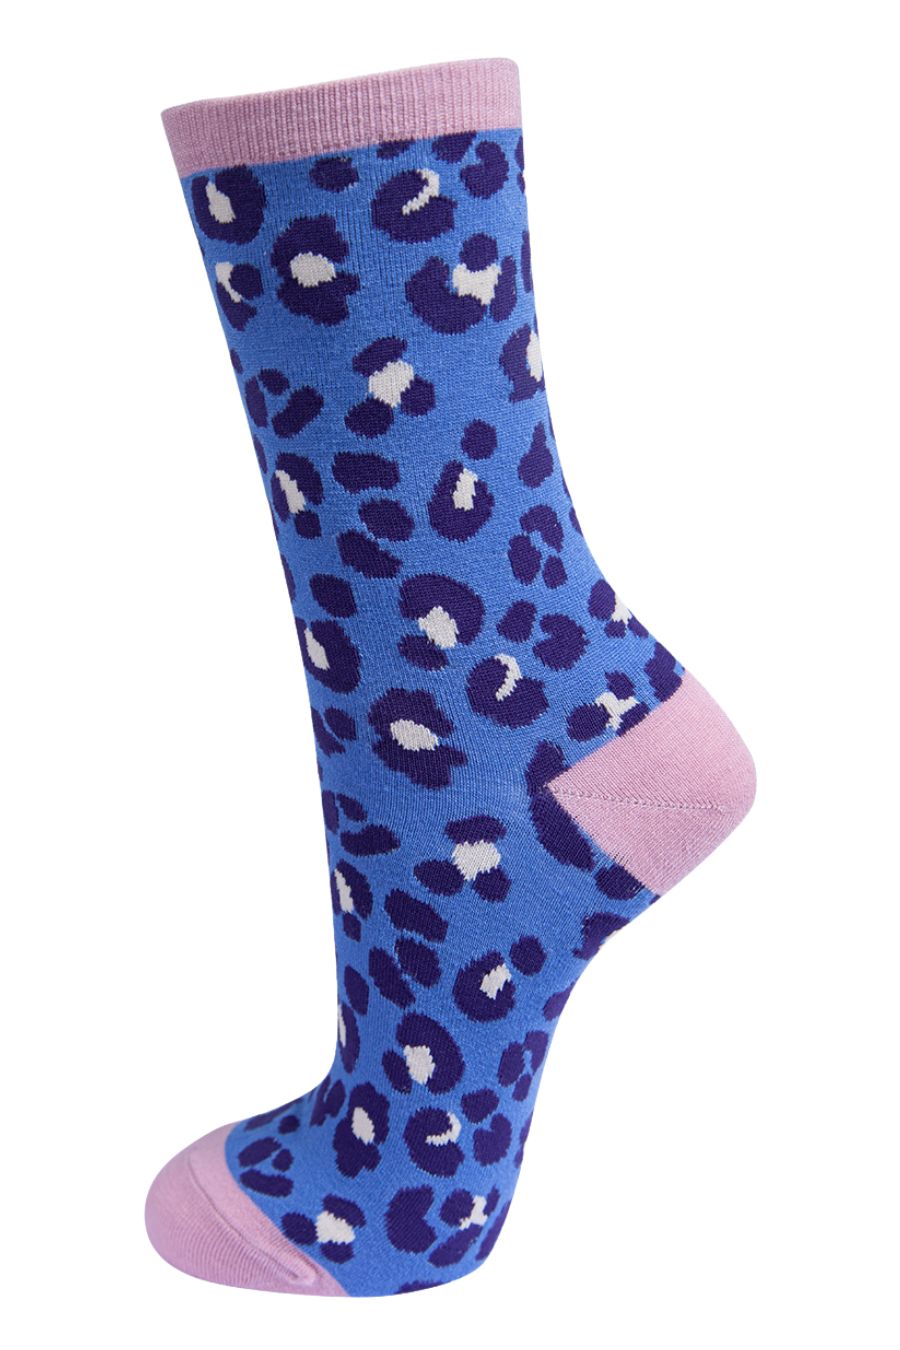 lilac blue and light pink leopard print socks with pink heel, toe and cuff